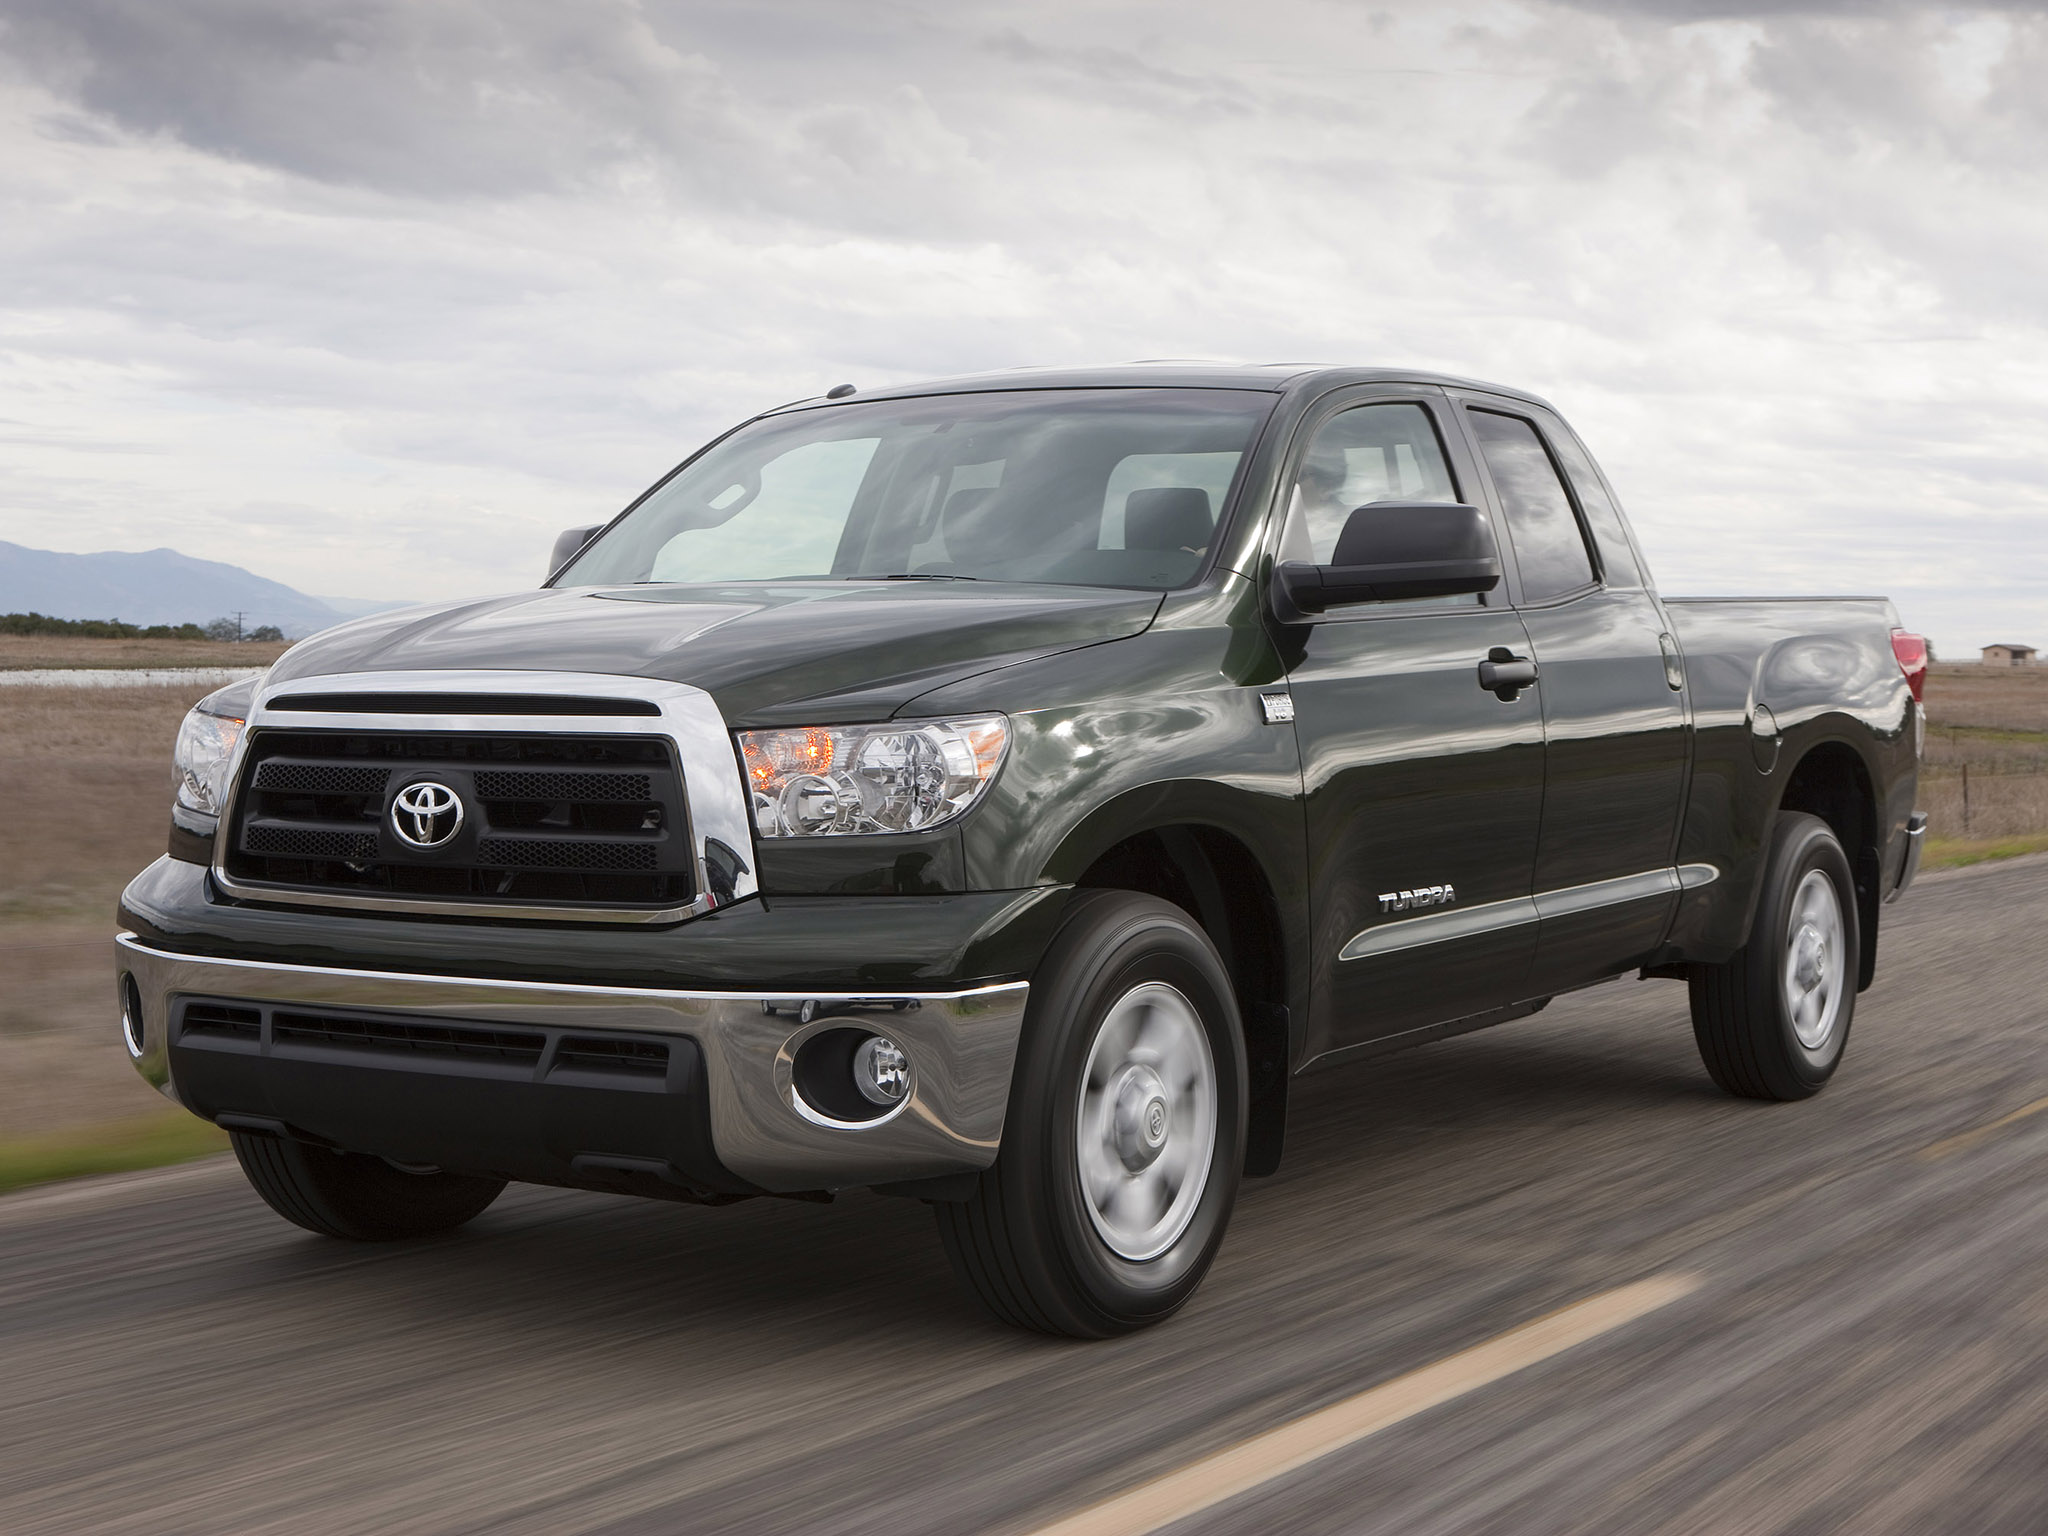 Car in pictures – car photo gallery » Toyota Tundra Double Cab 2009